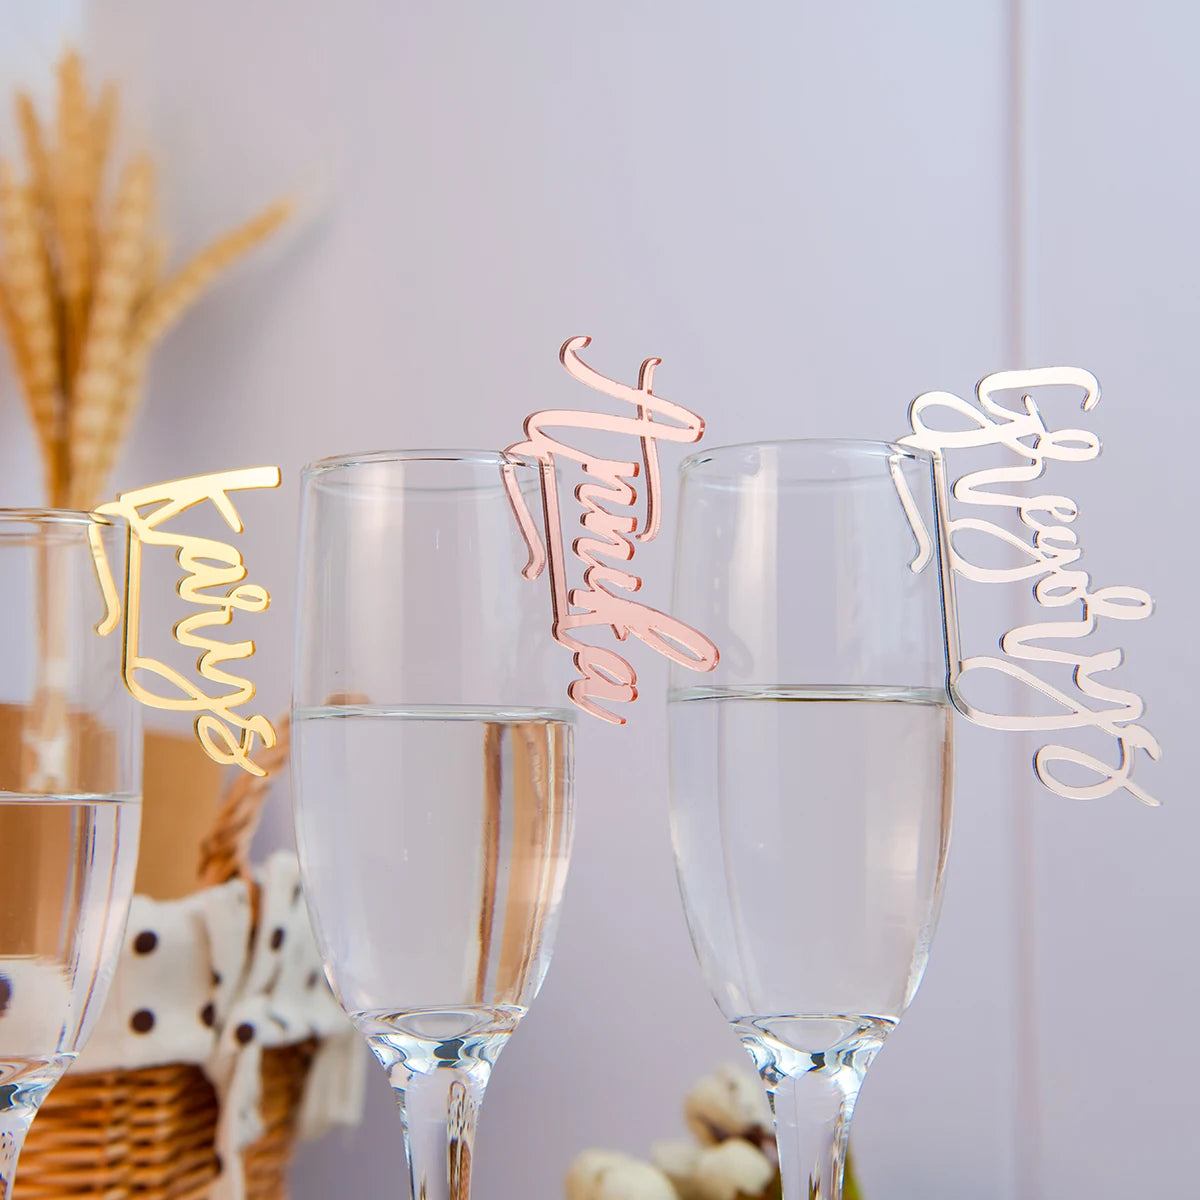 Personalized Acrylic Wedding Tags with Table Numbers for Place Cards and Drink Tags